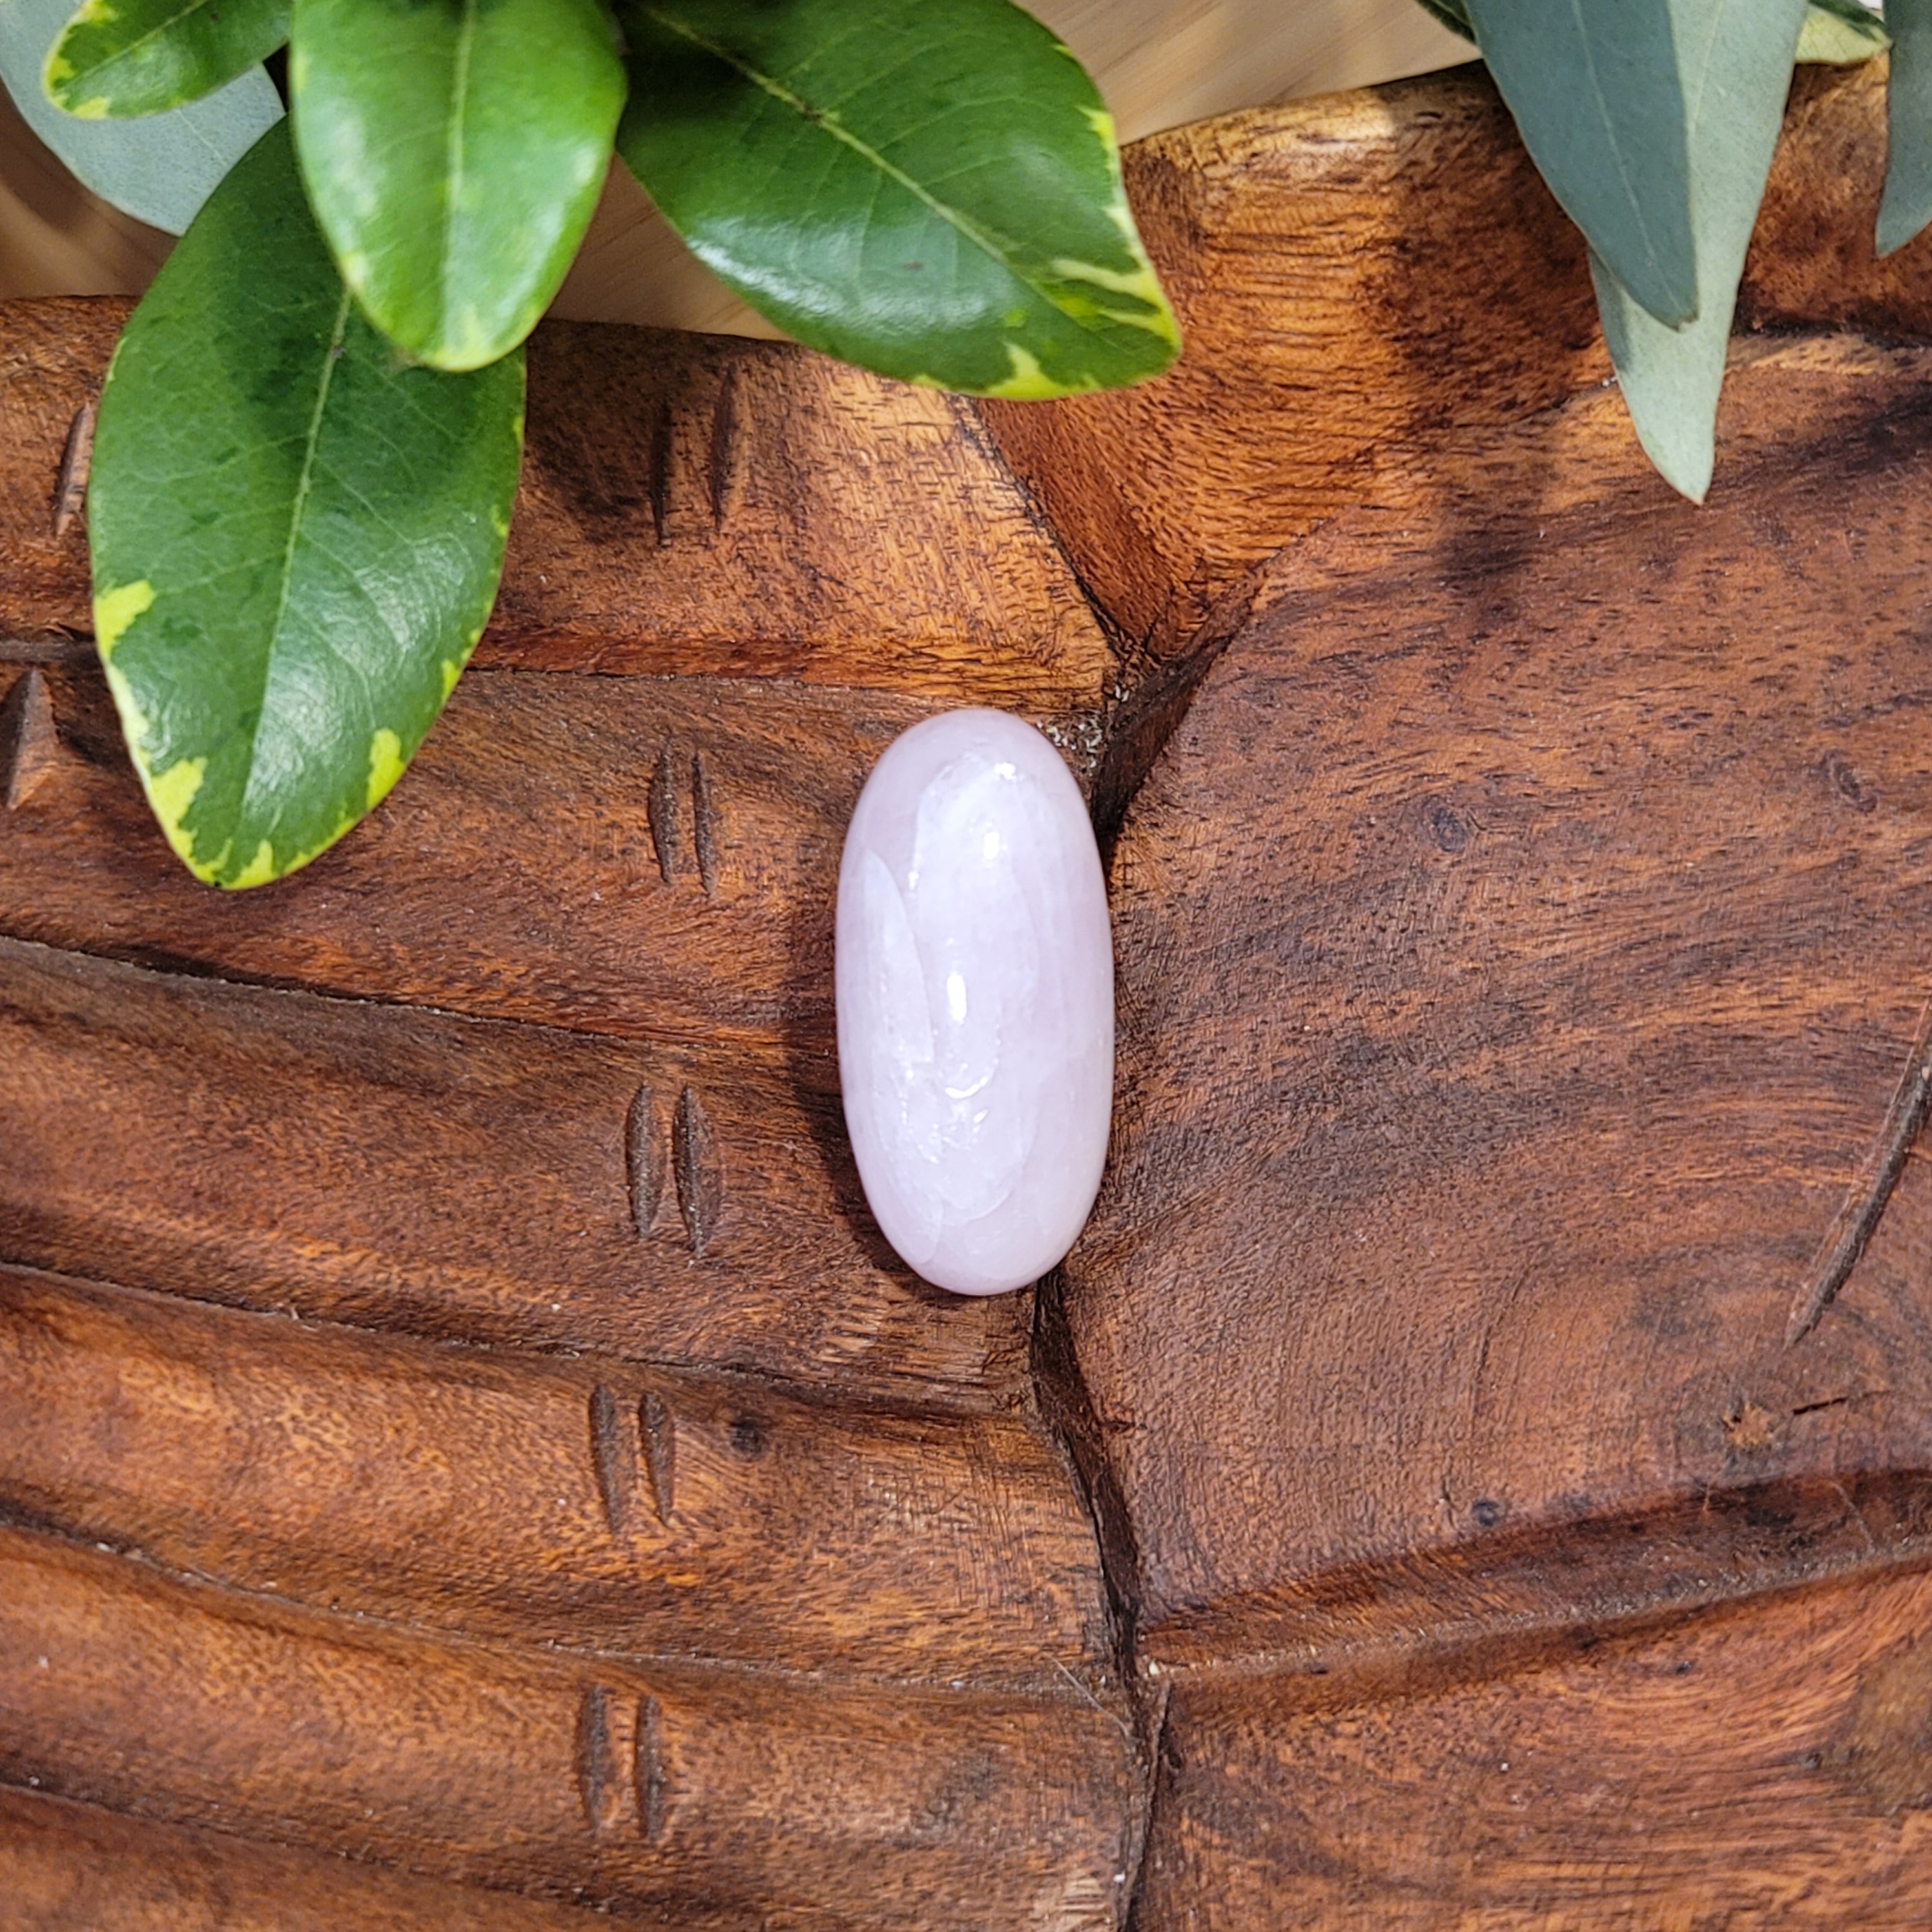 Kunzite Shiva for Emotional, Family Healing and Opening Your Heart to Love